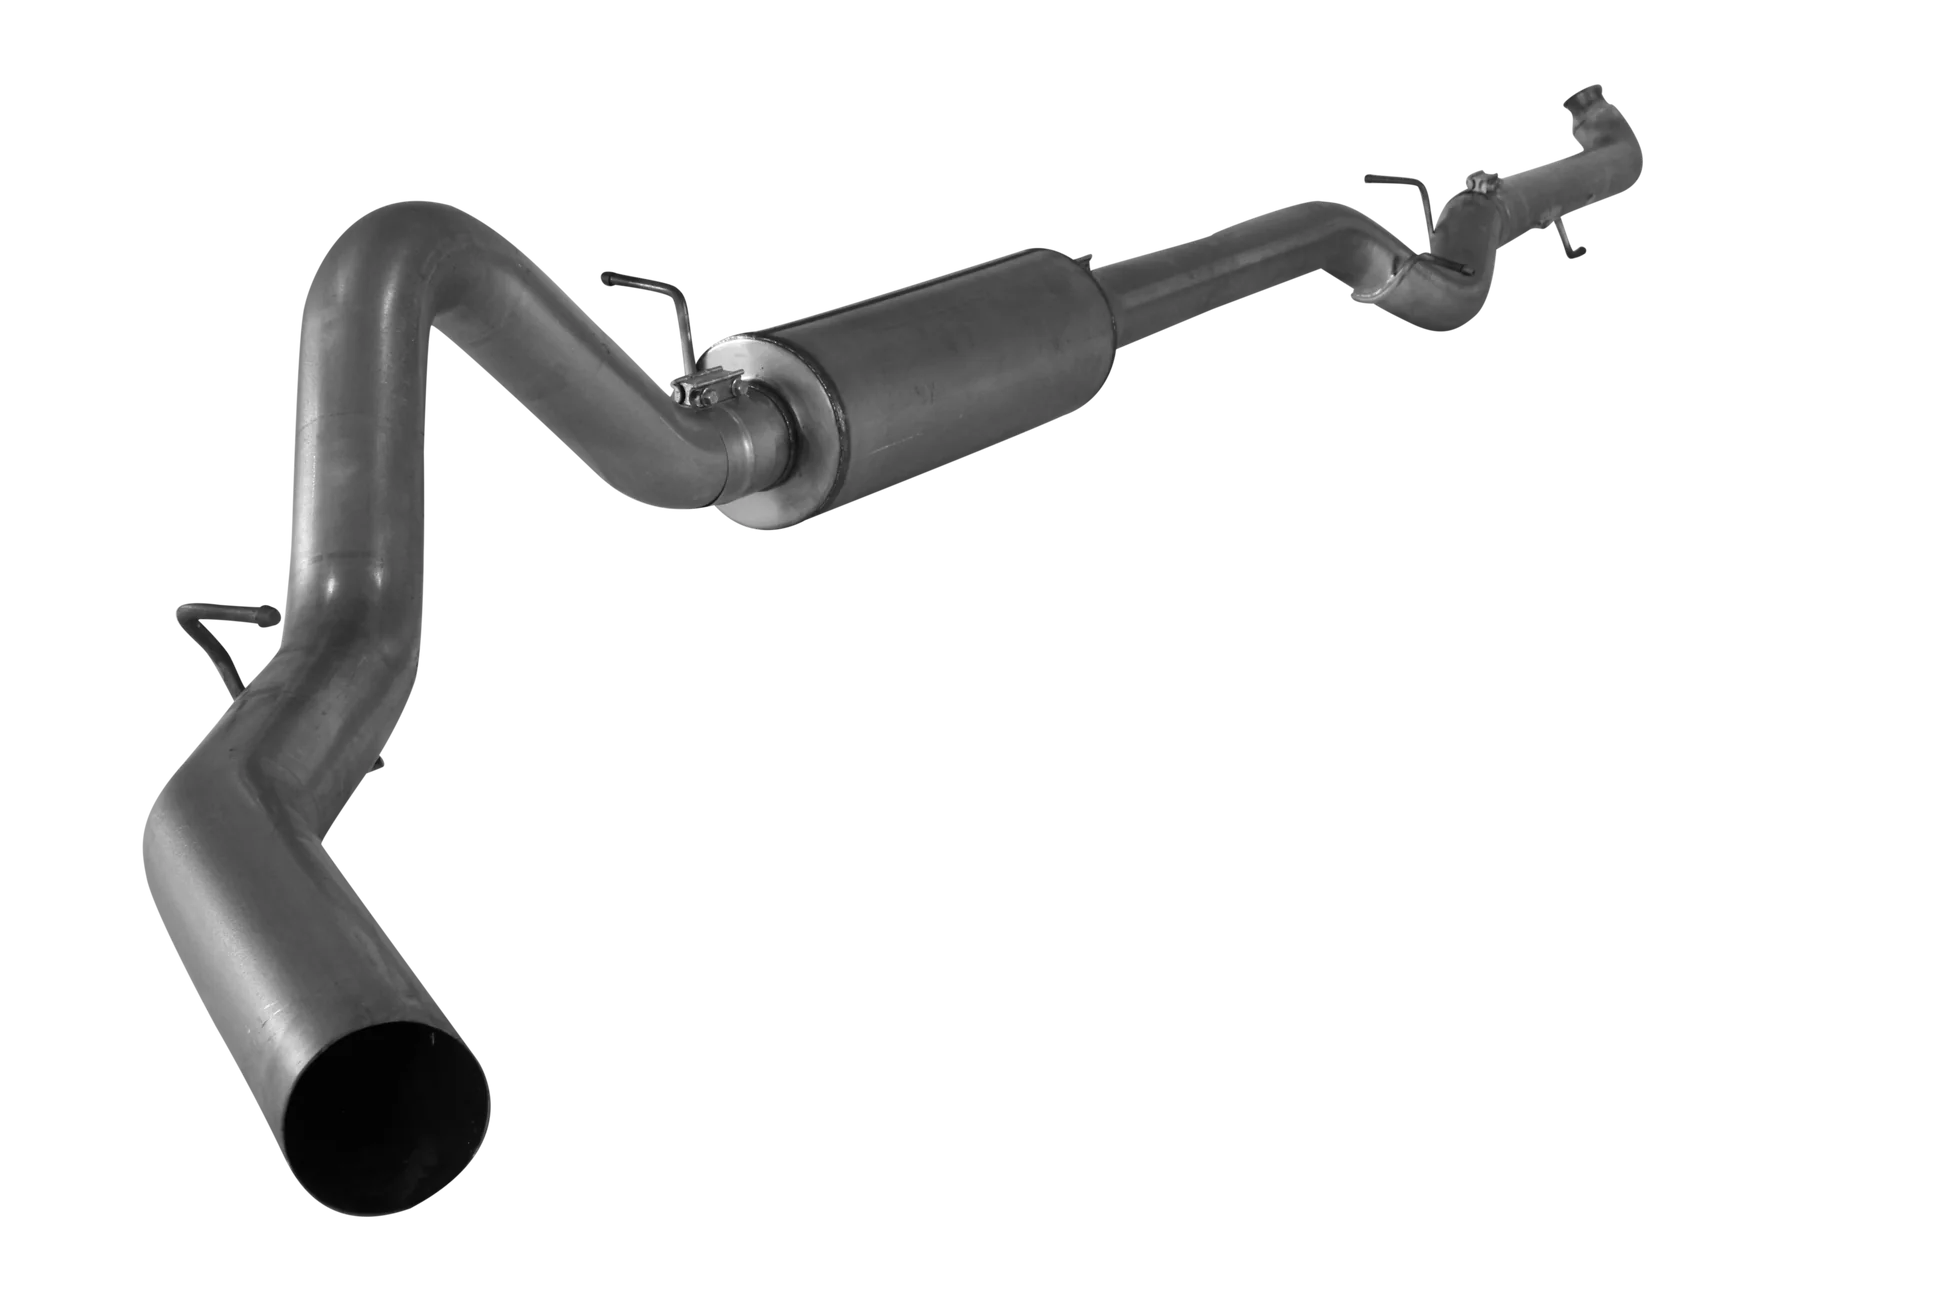 531100 531111 532100 532111 Mel's Manufacturing 5" Downpipe Back Single | 2001-2007 GM 2500/3500 6.6L DURAMAX   Mels Mfg FloPro Flo-Pro Flo Pro Hell On Wheels Performance Ltd Limited Canadian Owned and Operated Online Diesel Parts Distribution & Wholesale Supply Center in Alberta Canada Shipping Supplying to Alberta British Columbia Sask Saskatchewan Manitoba Ontario Quebec Newfoundland Labrador New Brunswick Nova Scotia Prince Edward Island AB BC SK MB ON QC PQ NS NB NFLD N.L. PEI